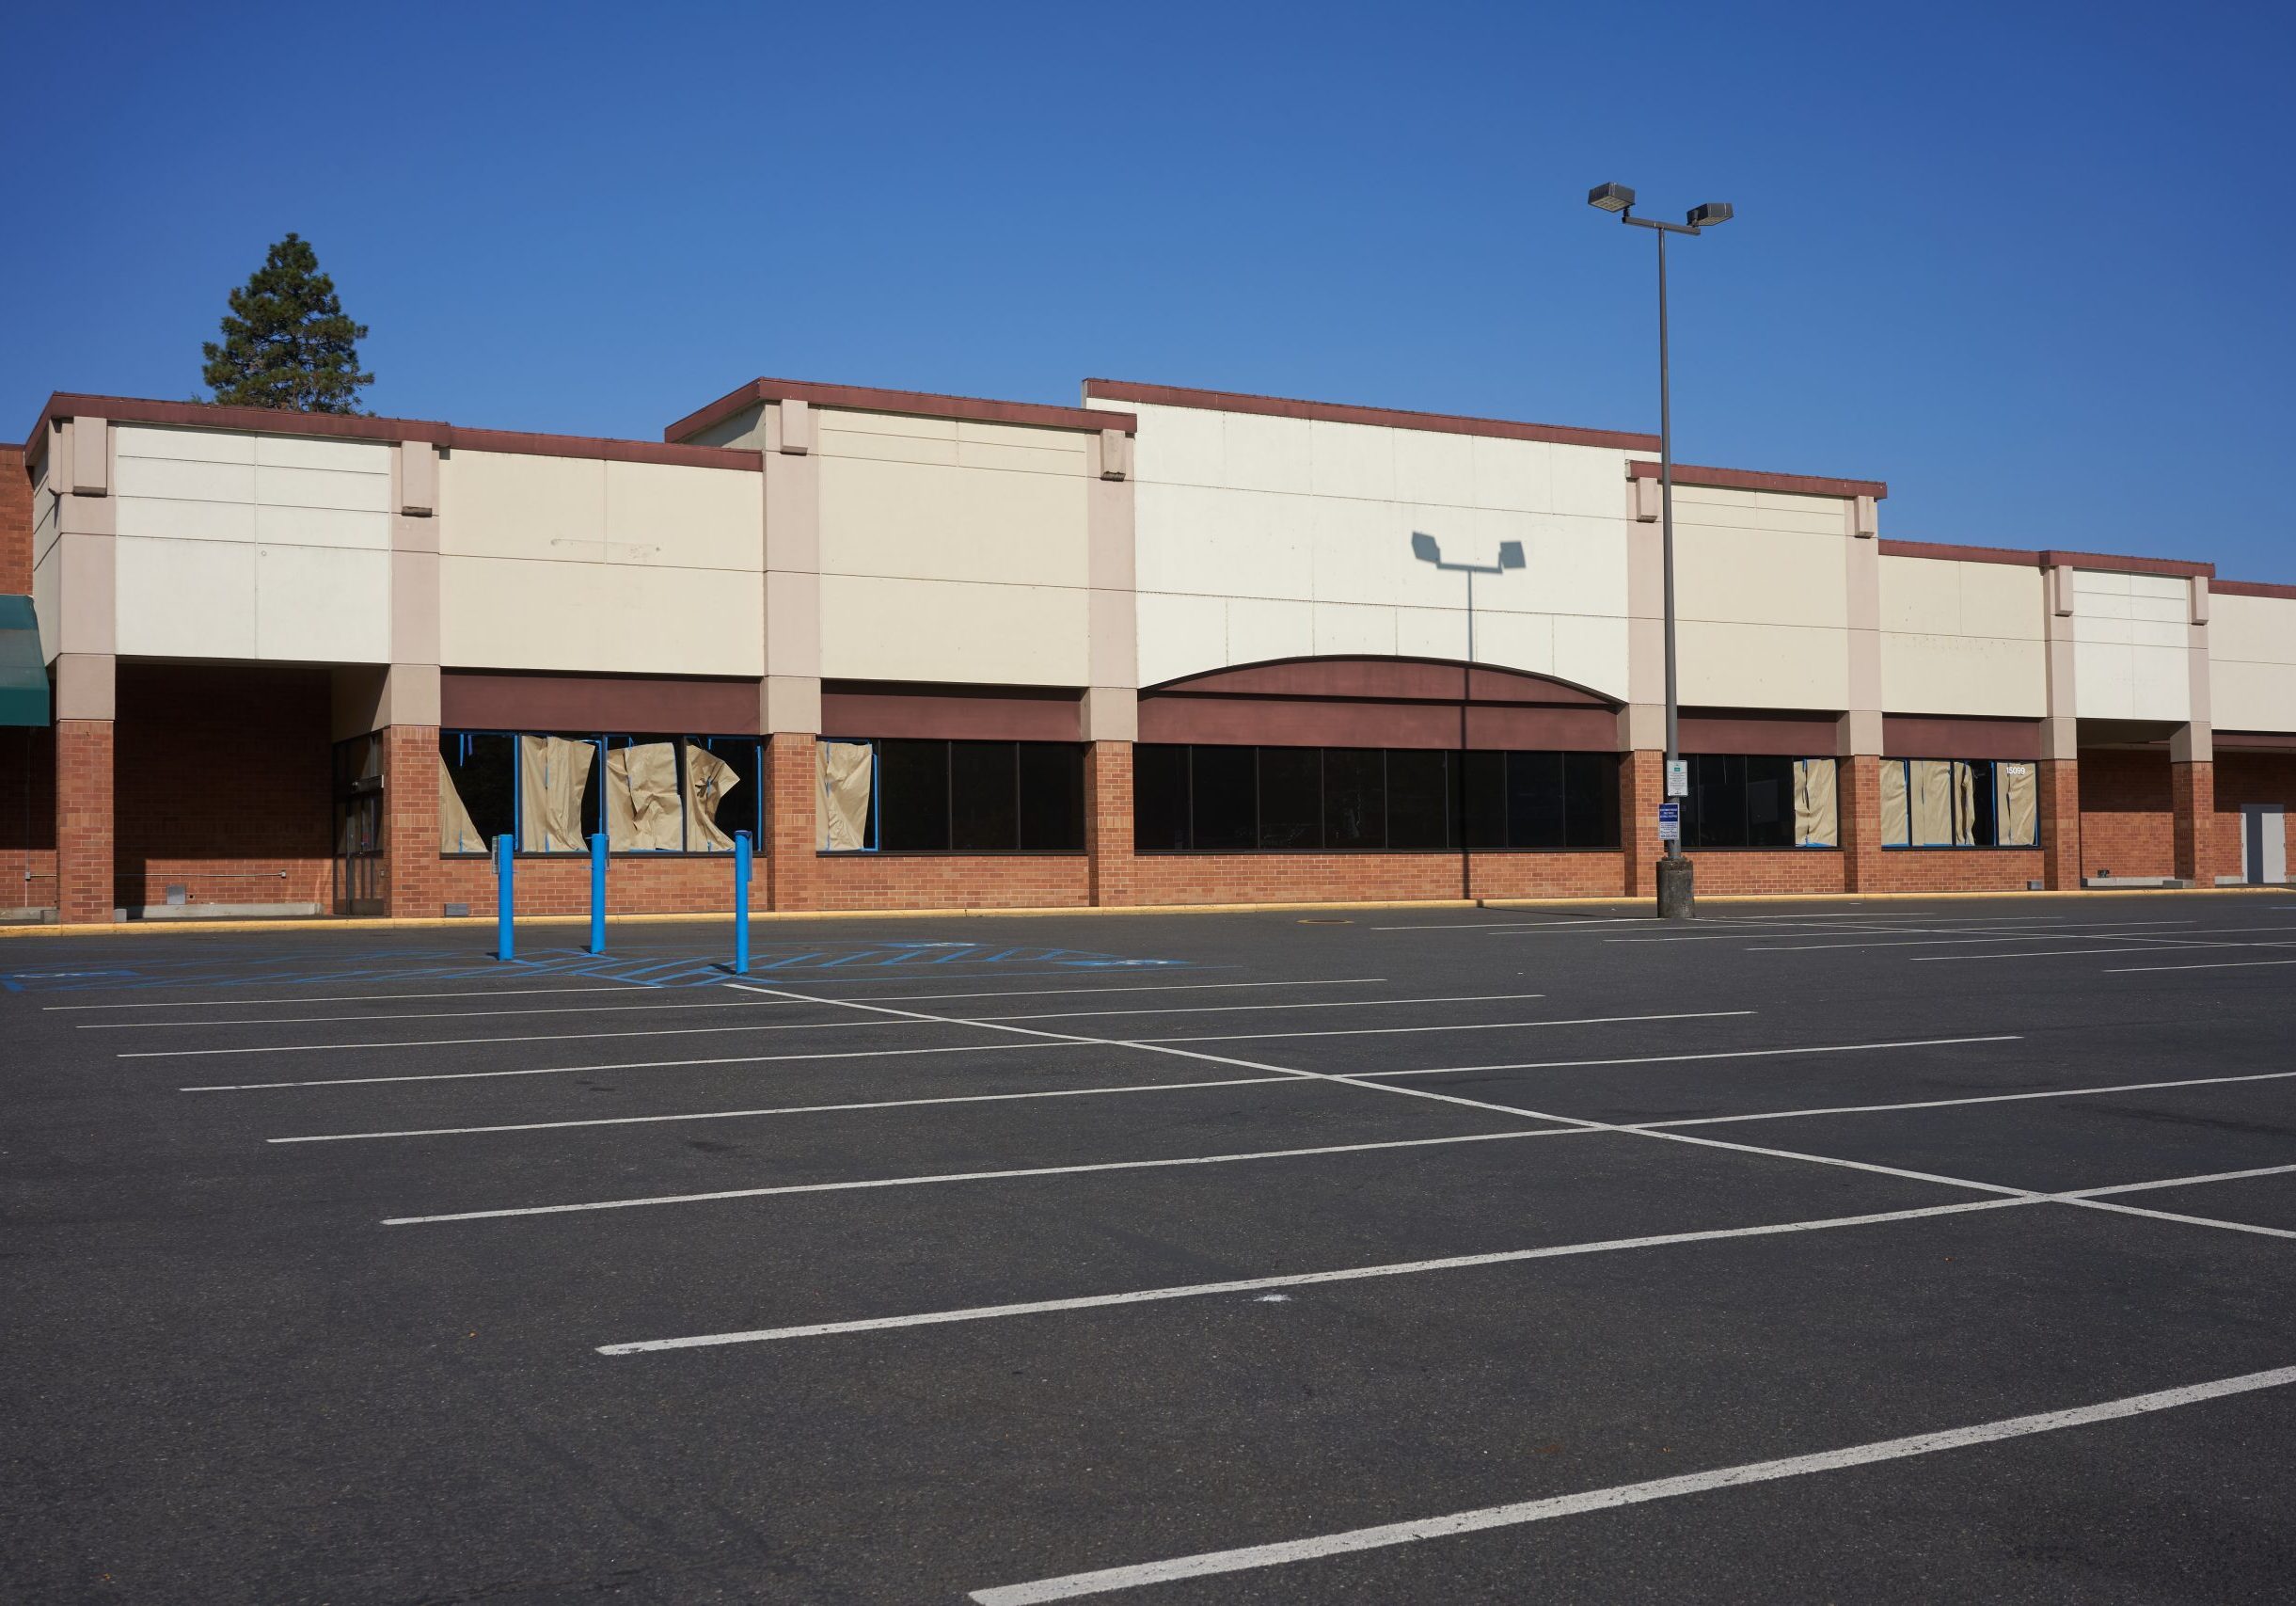 An out-of-business retail place with its empty parking lot in Po